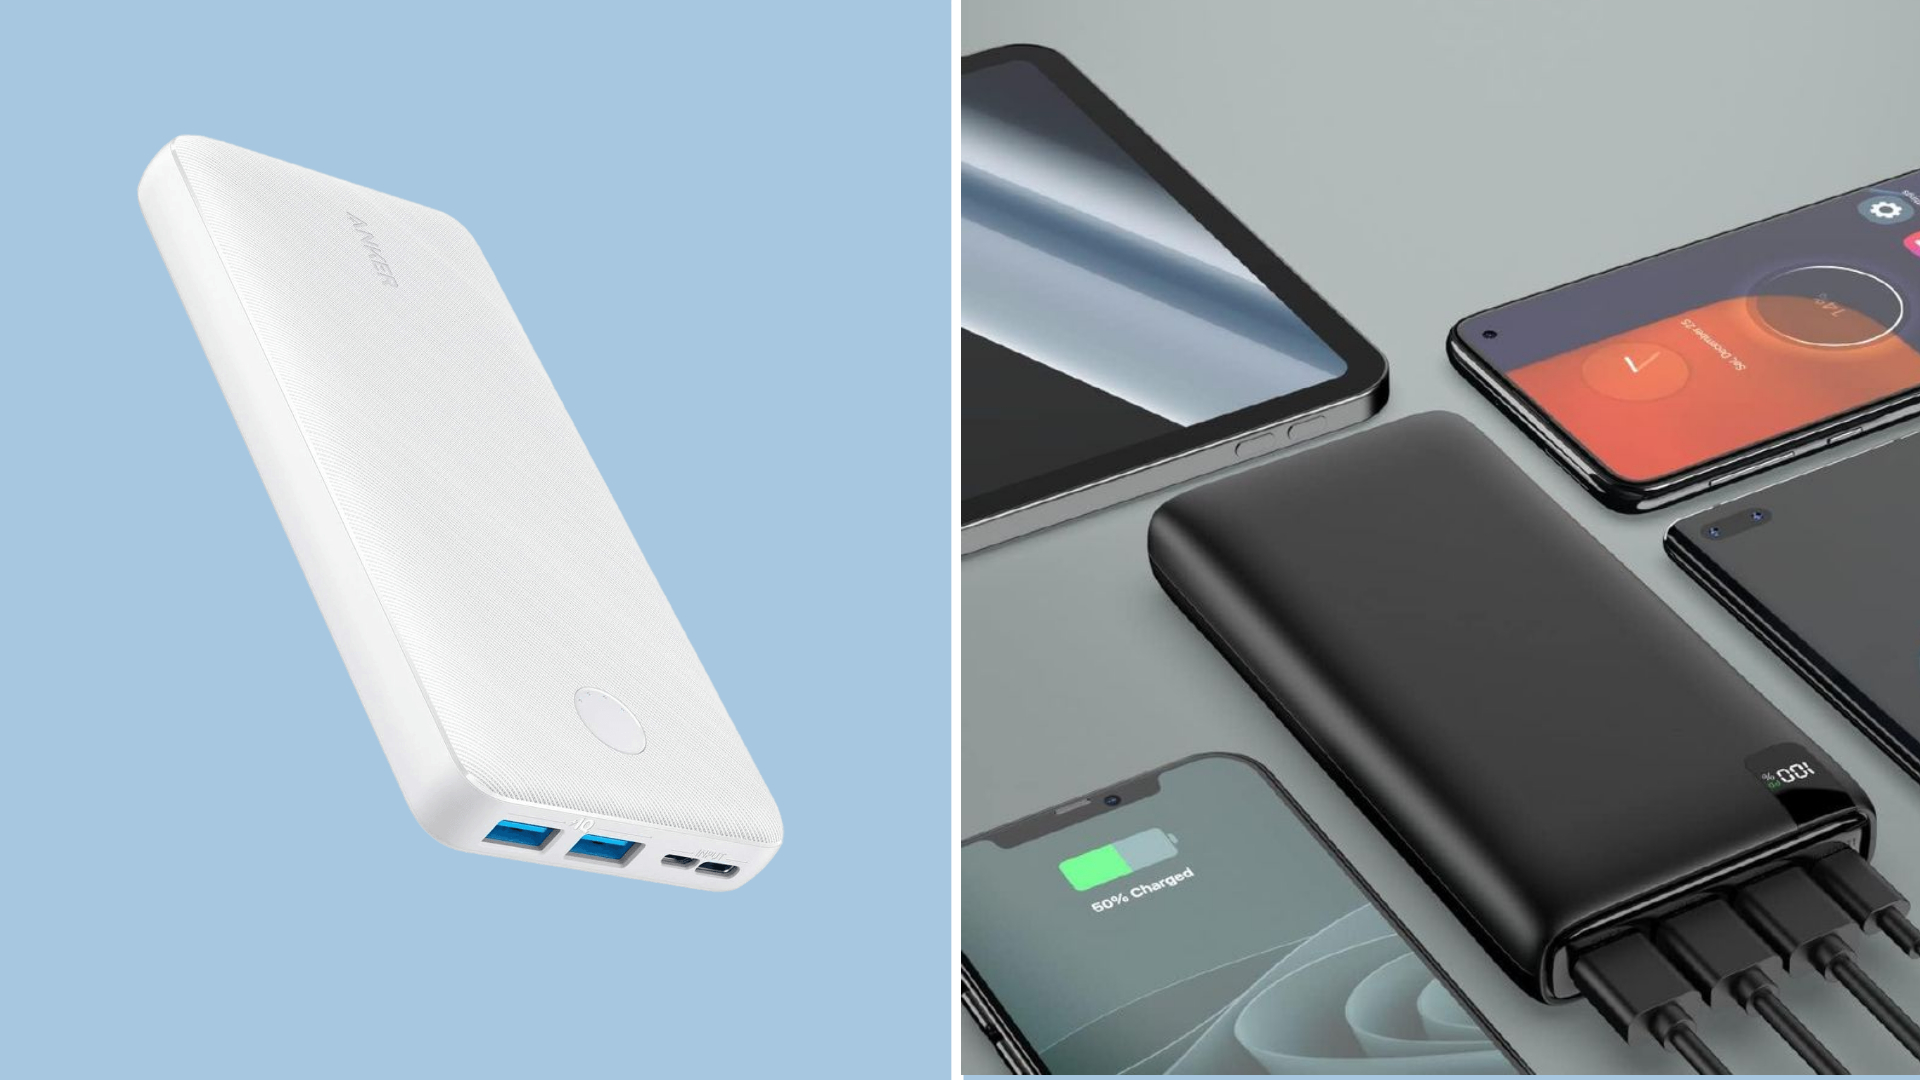 The Anker Prime 20,000 mAh Power Bank charges 3 devices at once